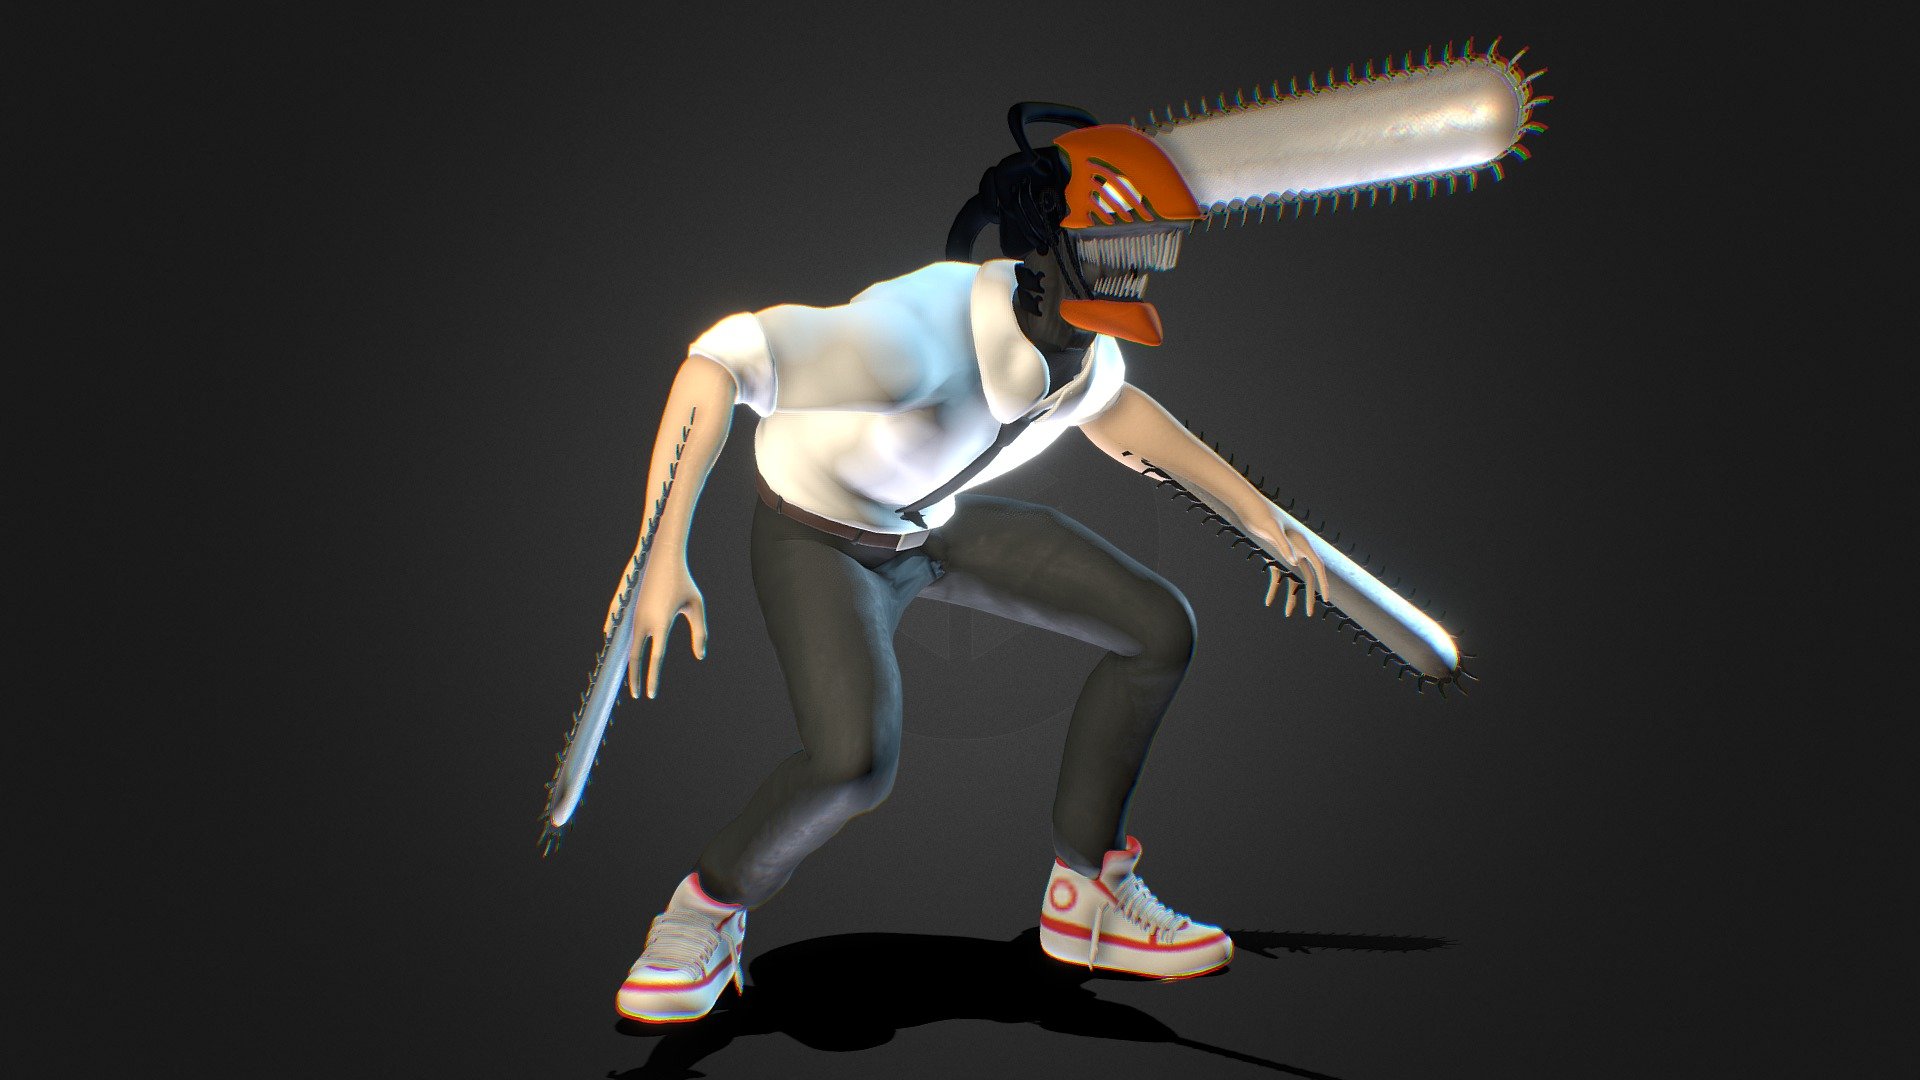 Hi,

i made a low-poly 3d model based on the anime character from Chainsaw Man. This model is made with blender. This model is textured and has a texture pack with color, roughness, metallic and normal maps in it. Also, it is rigged and has animation in it. It also includes Unity package, Blender files and fbx files.

The files included in the download is as below:




CSM_Rigging_AllPose.fbx

&ndash; No Embedded Texture

&ndash; Animation included:

Attack

Taunt

T-pose




CSM_wAnimation.unitypackage

&ndash; Animation Controller

&ndash; Include Embedded Texture

&ndash; Animation included:

Attack

Taunt

T-pose




CSM_Rigging_fix.blend

&ndash; Render settings

&ndash; Embedded Texture

&ndash; Animation included:

Attack

Taunt

T-pose

If you have any question, just DM me.

 - Chainsaw Man Denji - Buy Royalty Free 3D model by 3DHArt 3d model